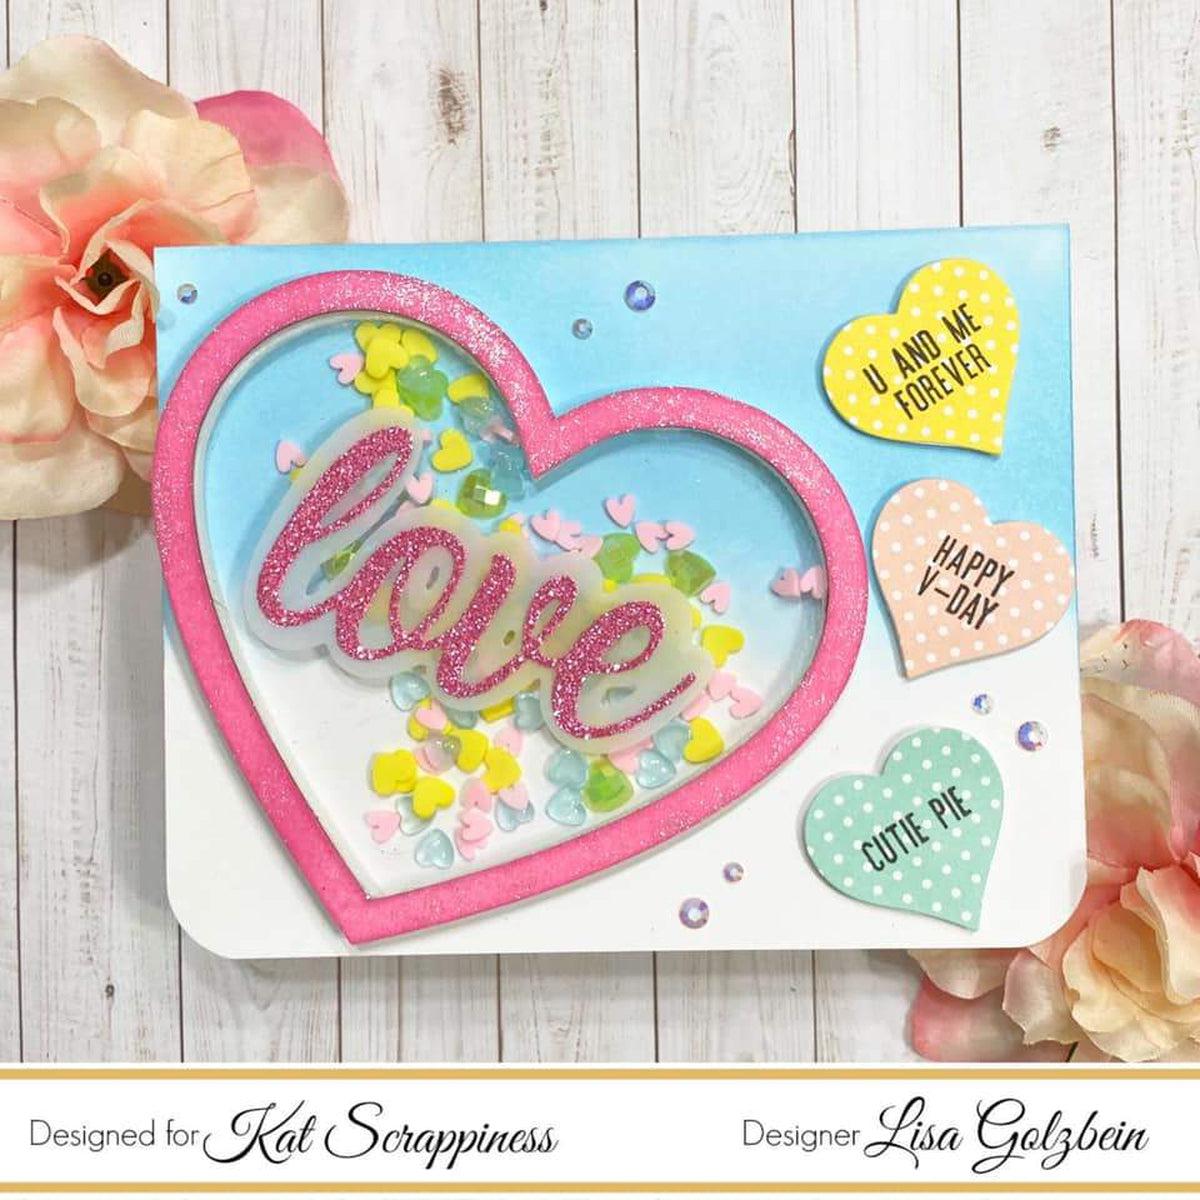 Pink Heart Sprinkles (Small) by Kat Scrappiness - Kat Scrappiness